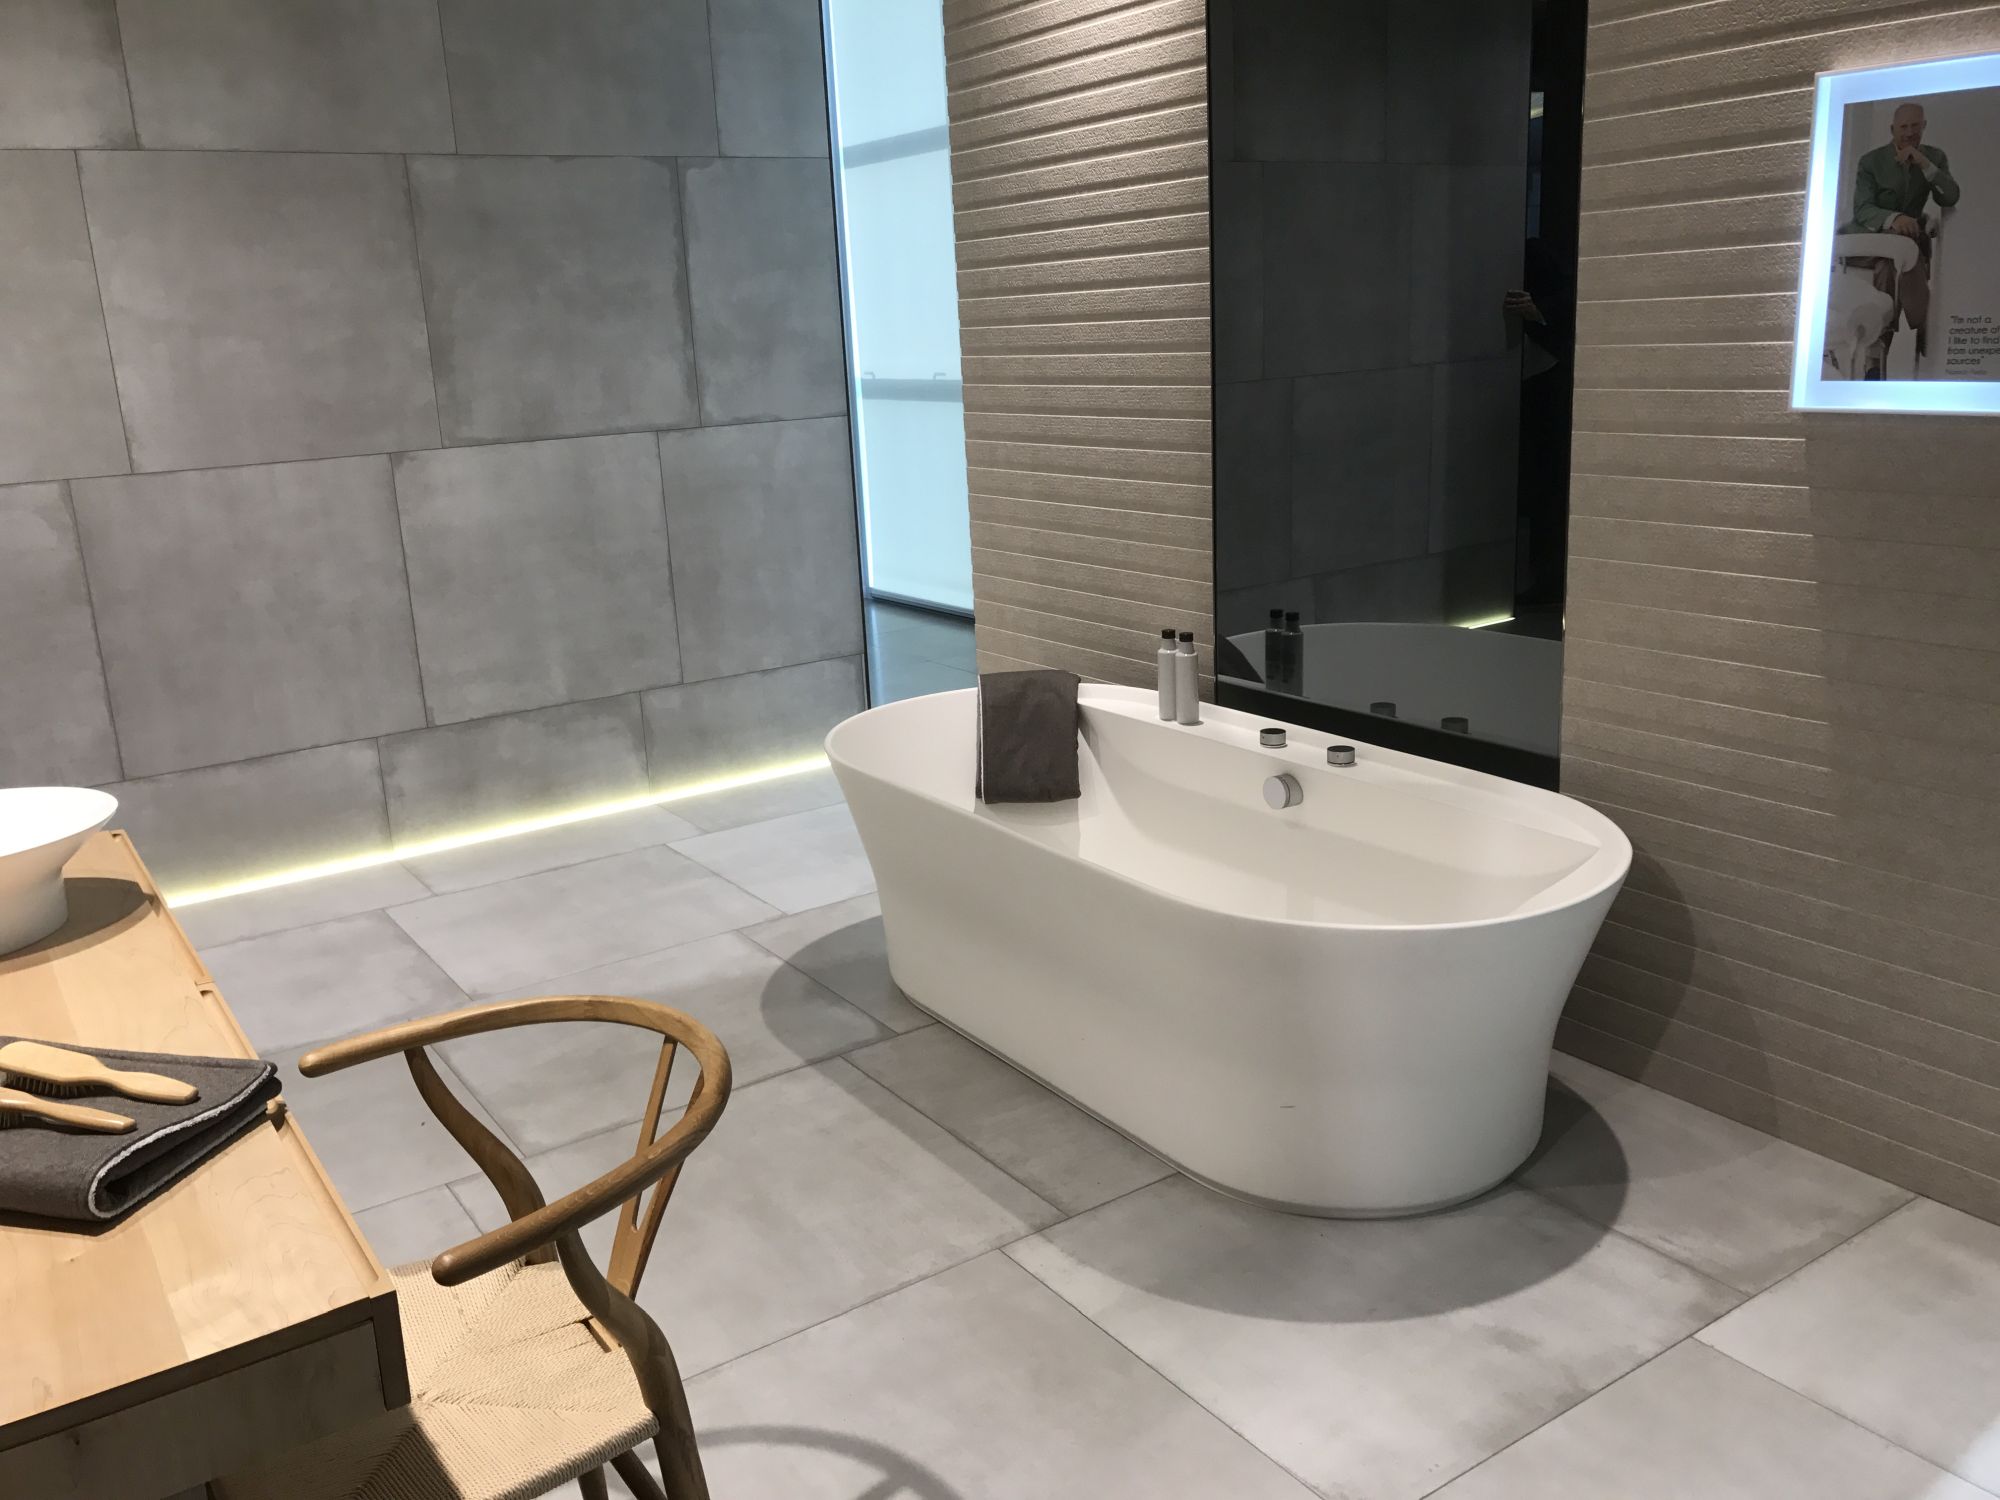 Cement like wall and floor tiles in modern bathroom design by Porcelanosa